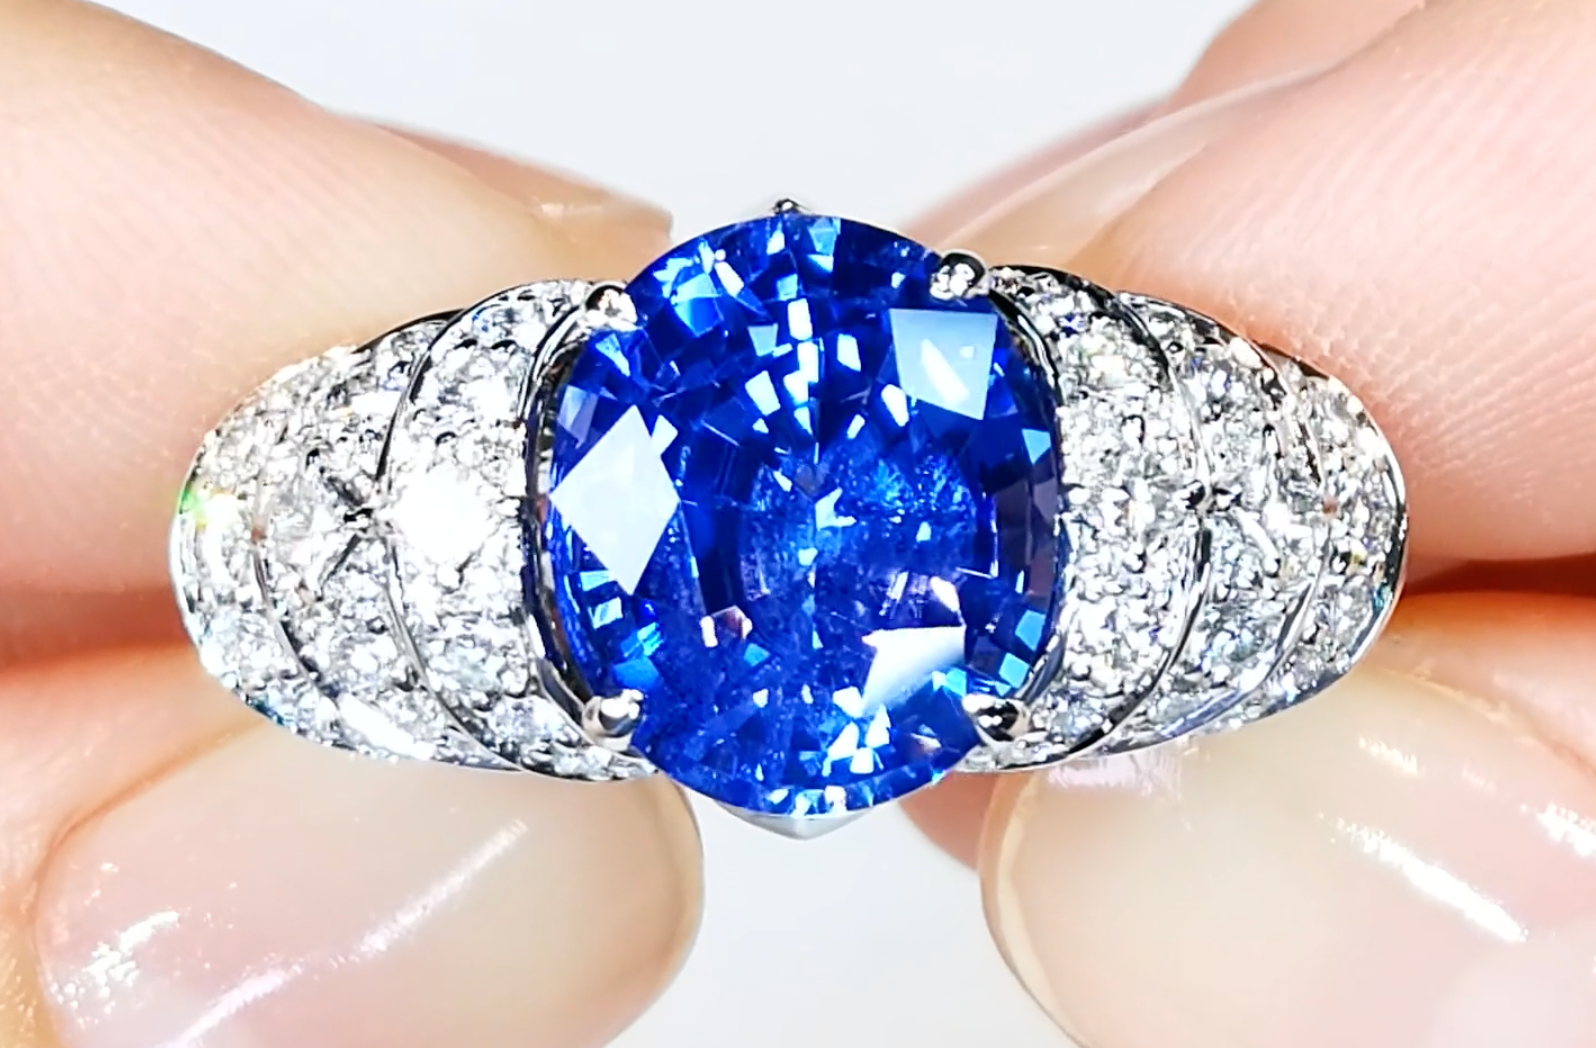 6.69ct Unheated Ceylon Blue Sapphire Ring with D Flawless Diamonds set in 18K White Gold